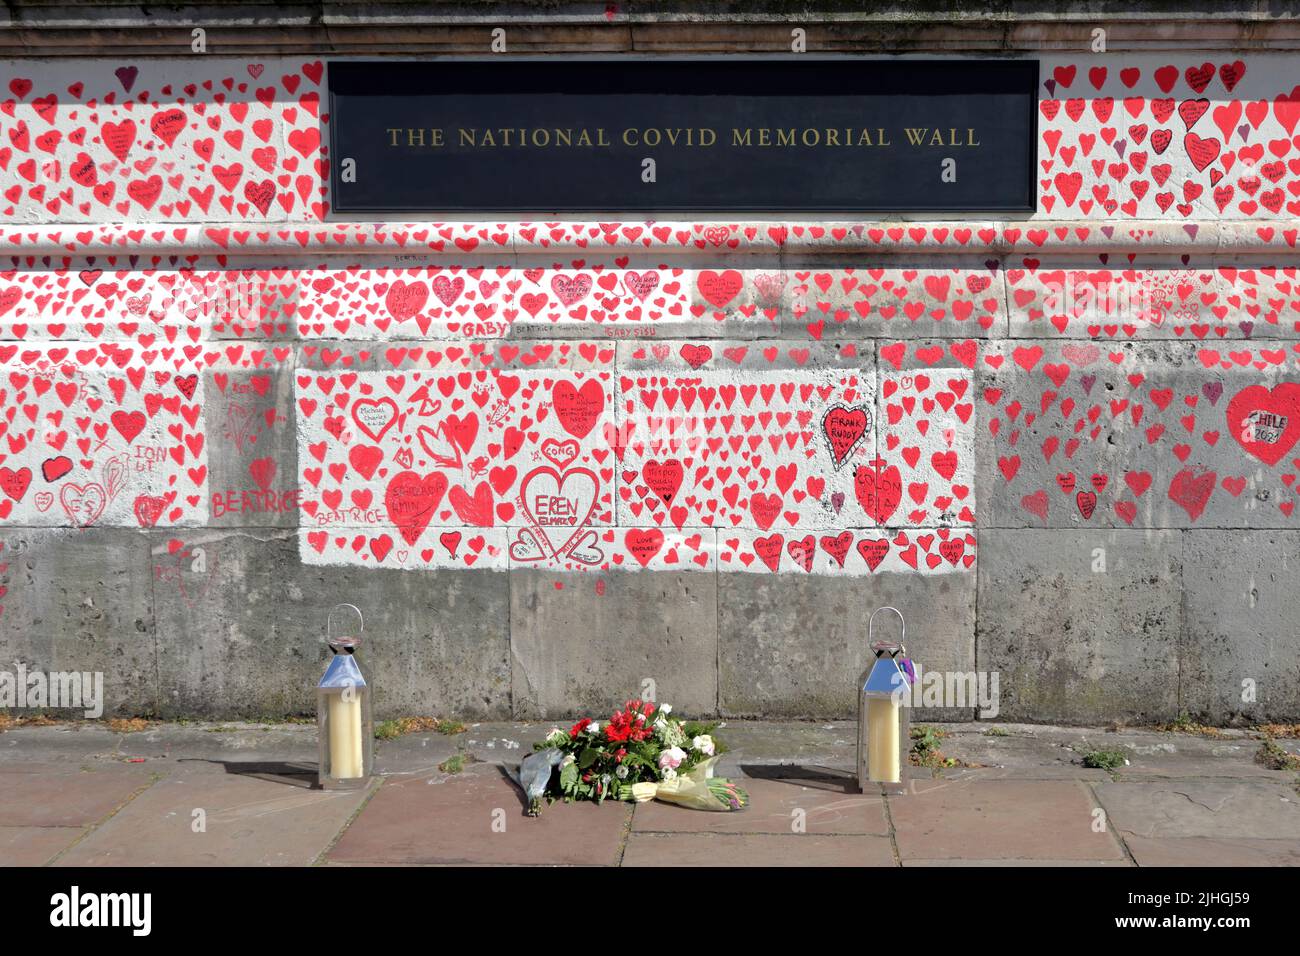 London, UK - March 30, 2021: The National Covid Memorial Wall, volunteers painting 150,000 red hearts to commemorate Covid-19 deaths Stock Photo